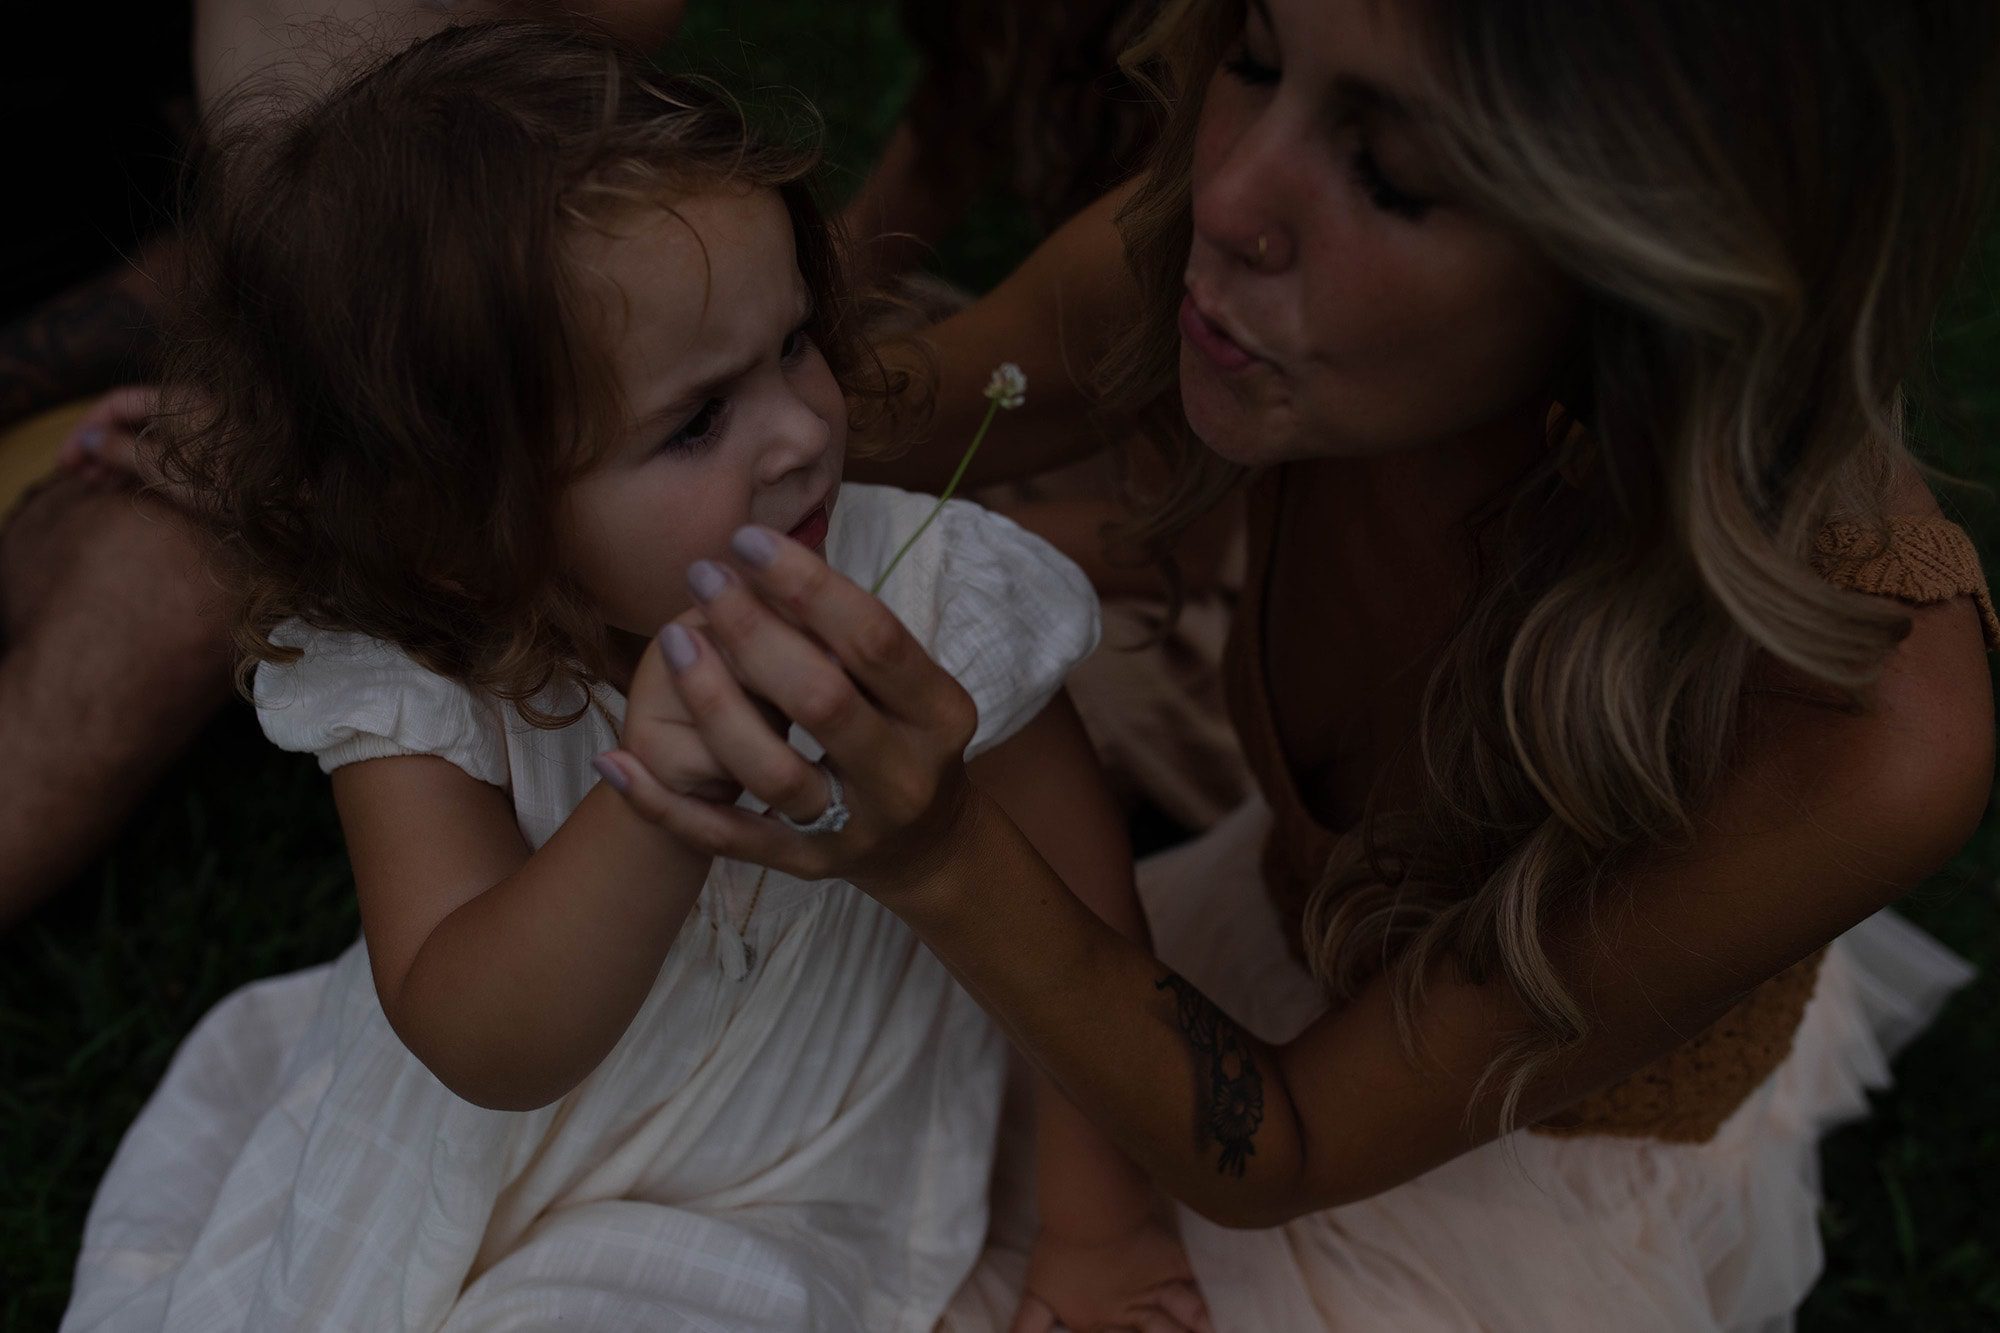 A sweet moment between mother and daughter blowing out a dandelion captured on film